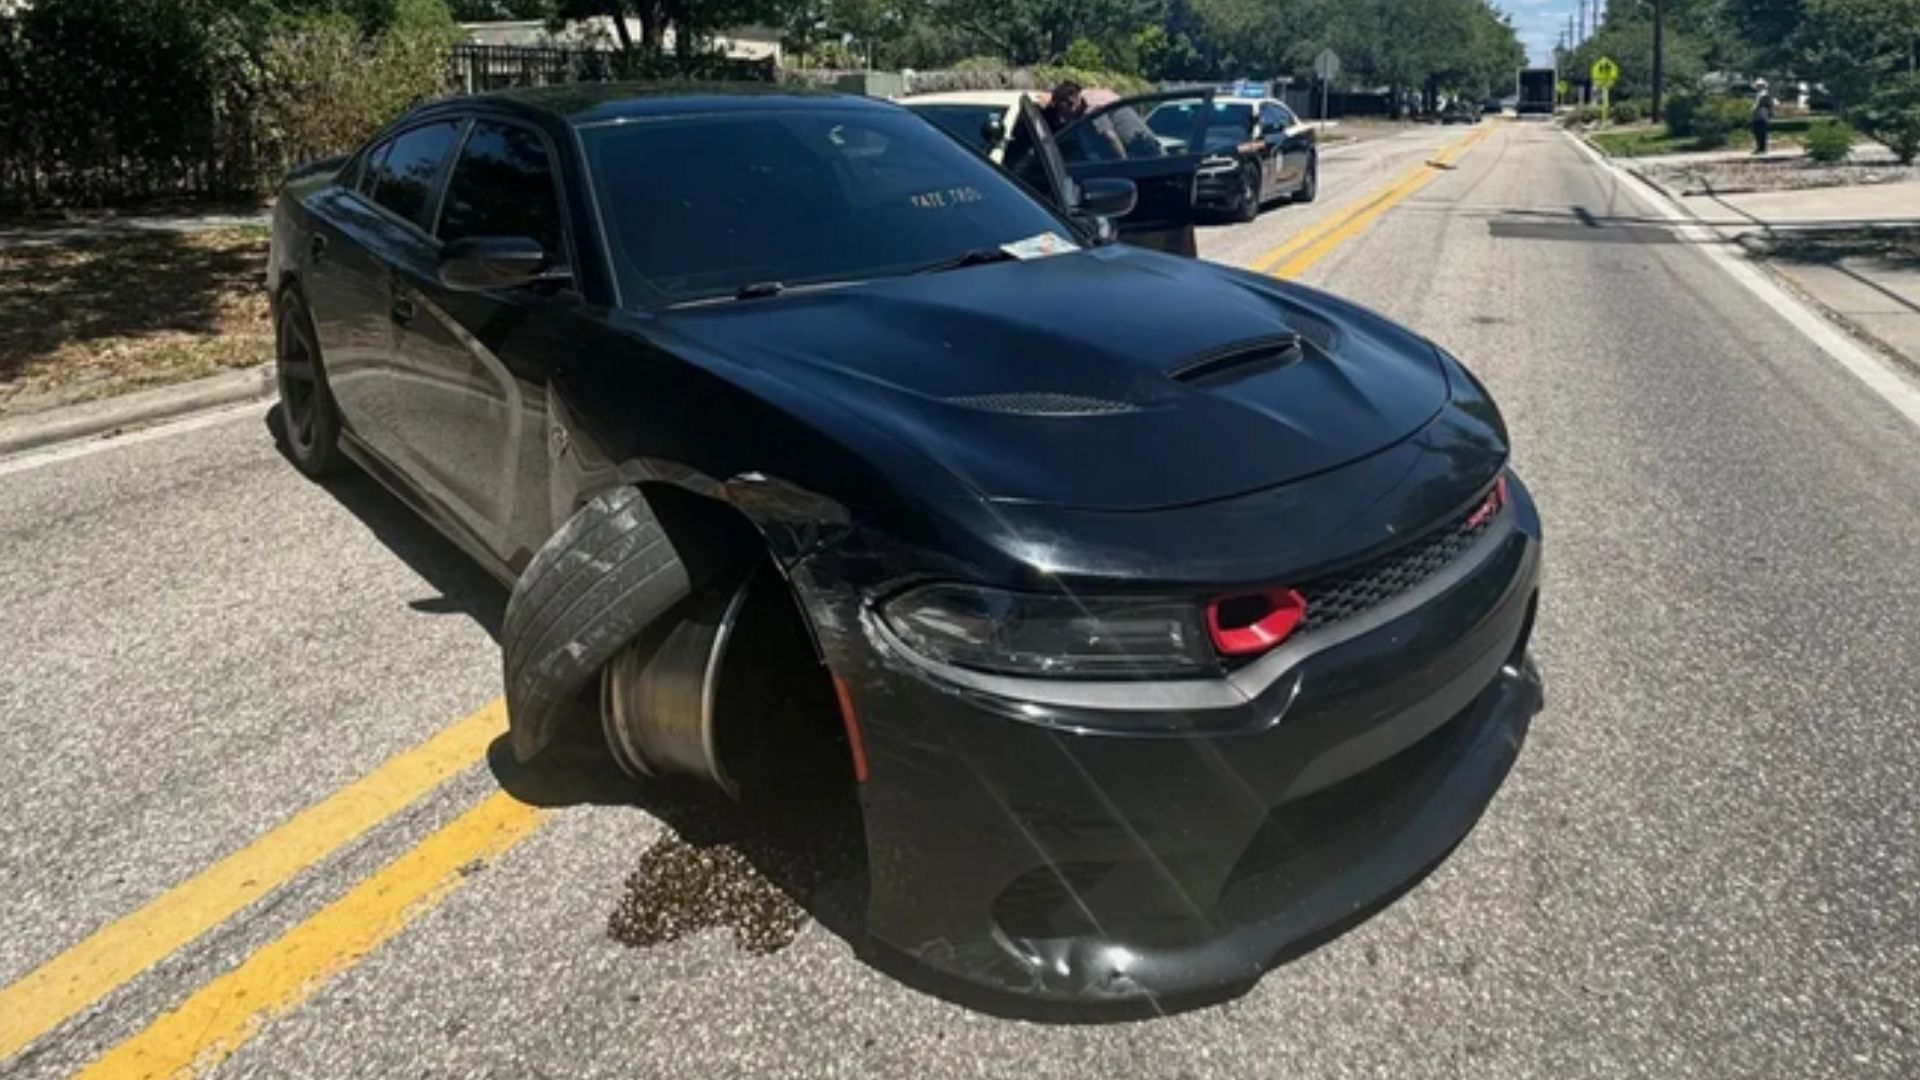 Florida Man Goes 147 MPH In Hellcat To Lose Troopers